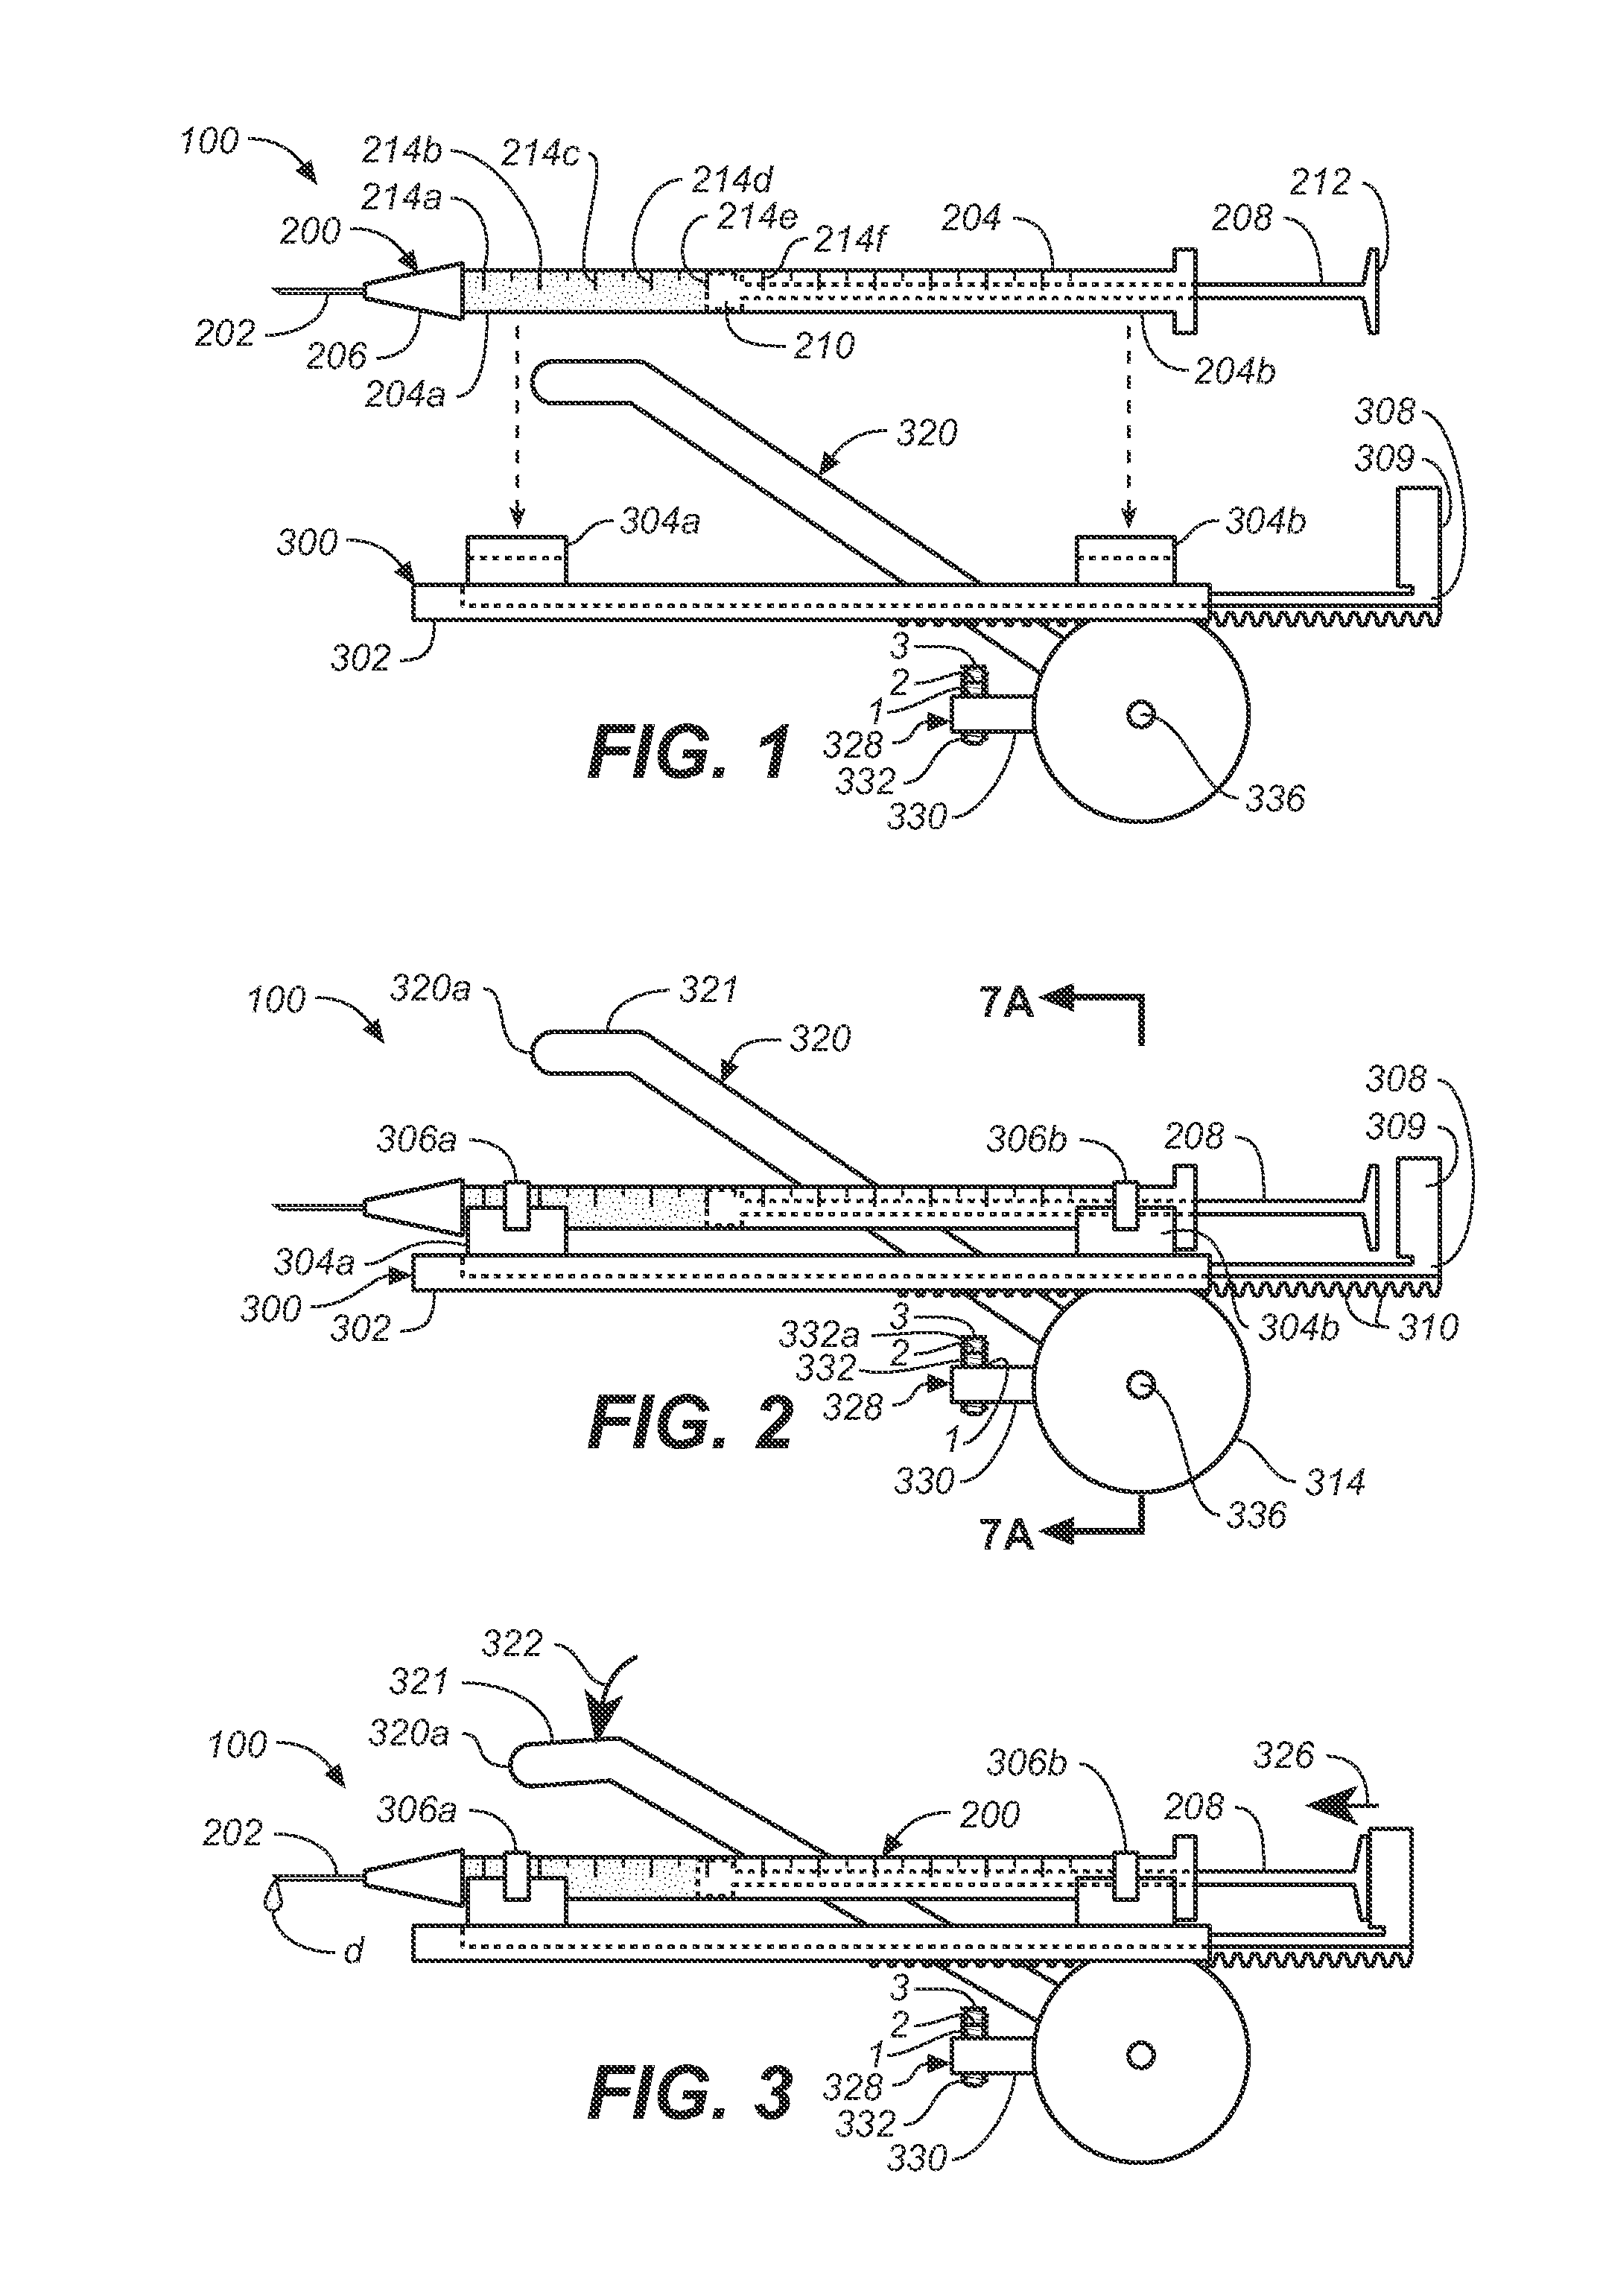 Handheld medical substance dispensing system, apparatus and methods